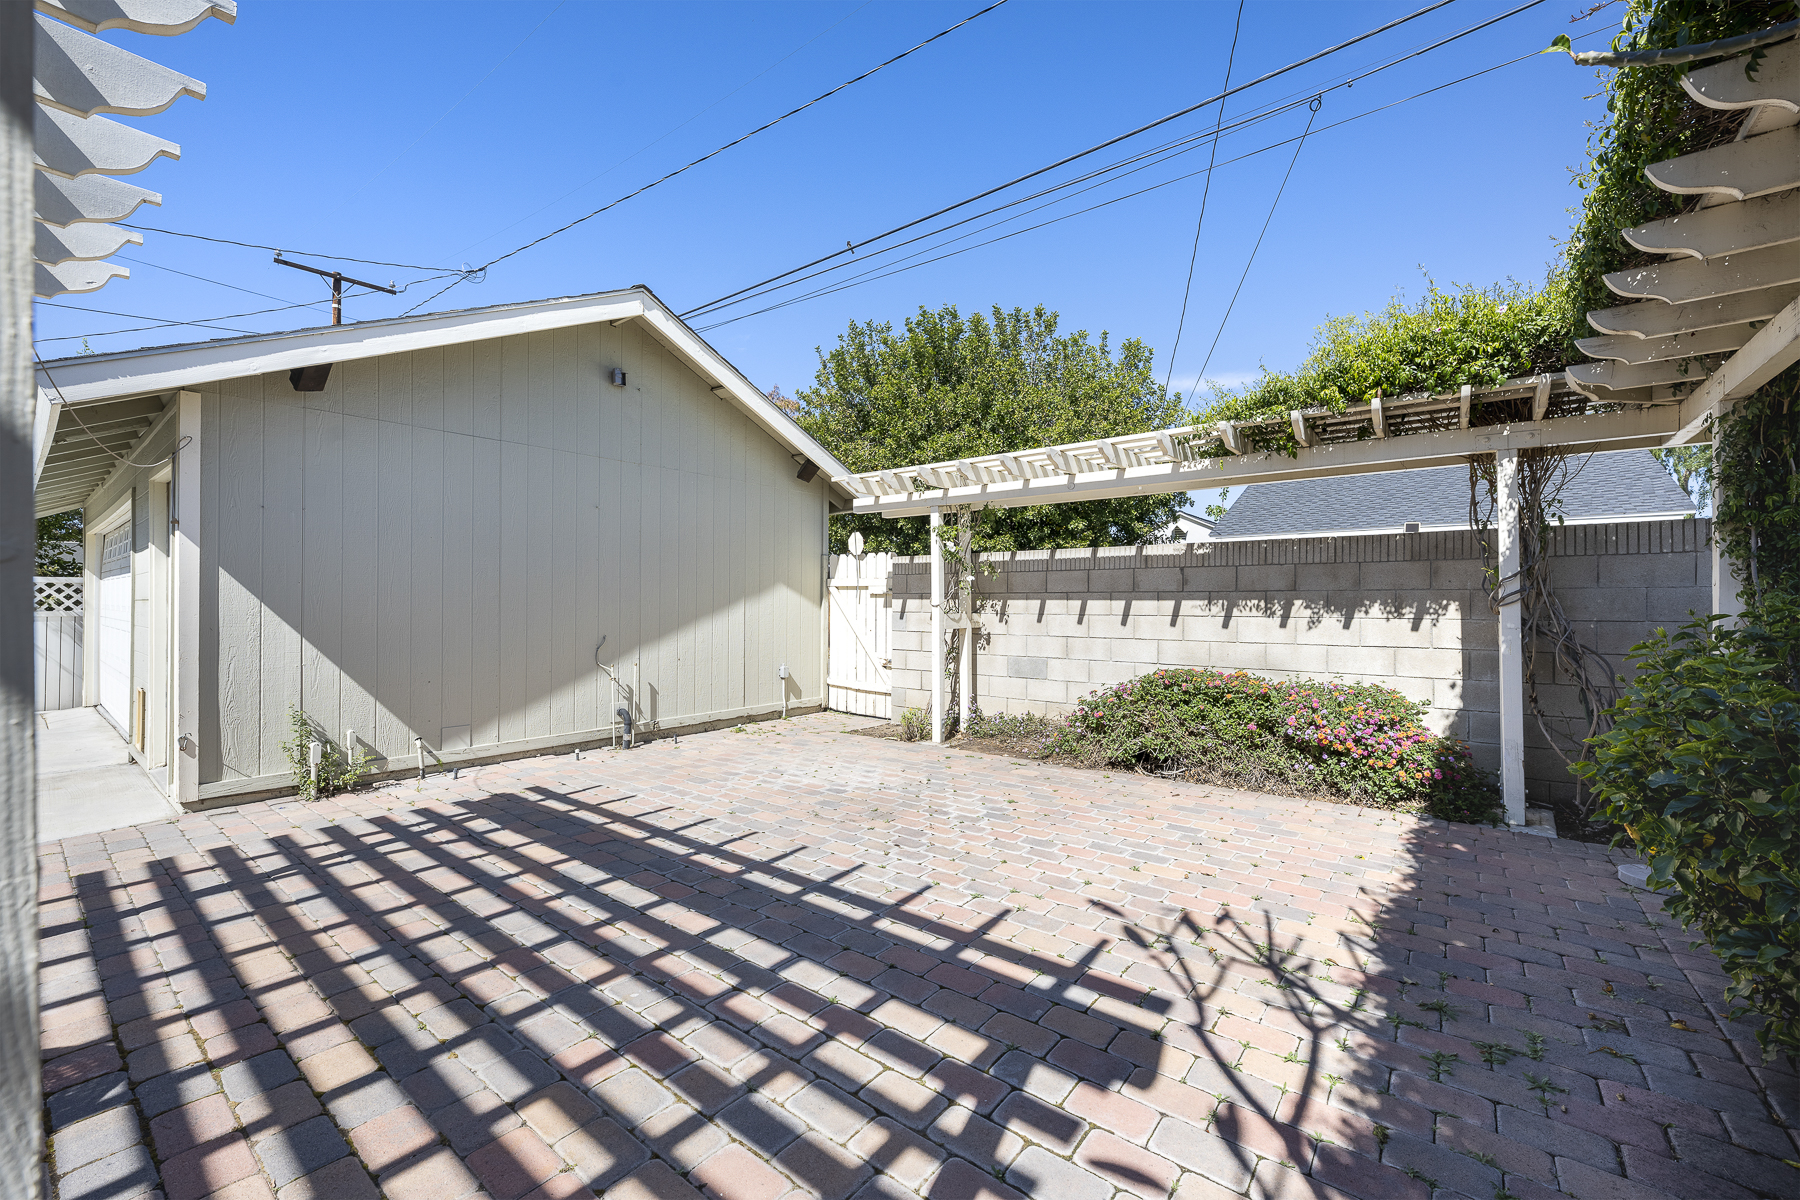 1229 Grove Place Fullerton CA 92831: Courtyard looking towards gate